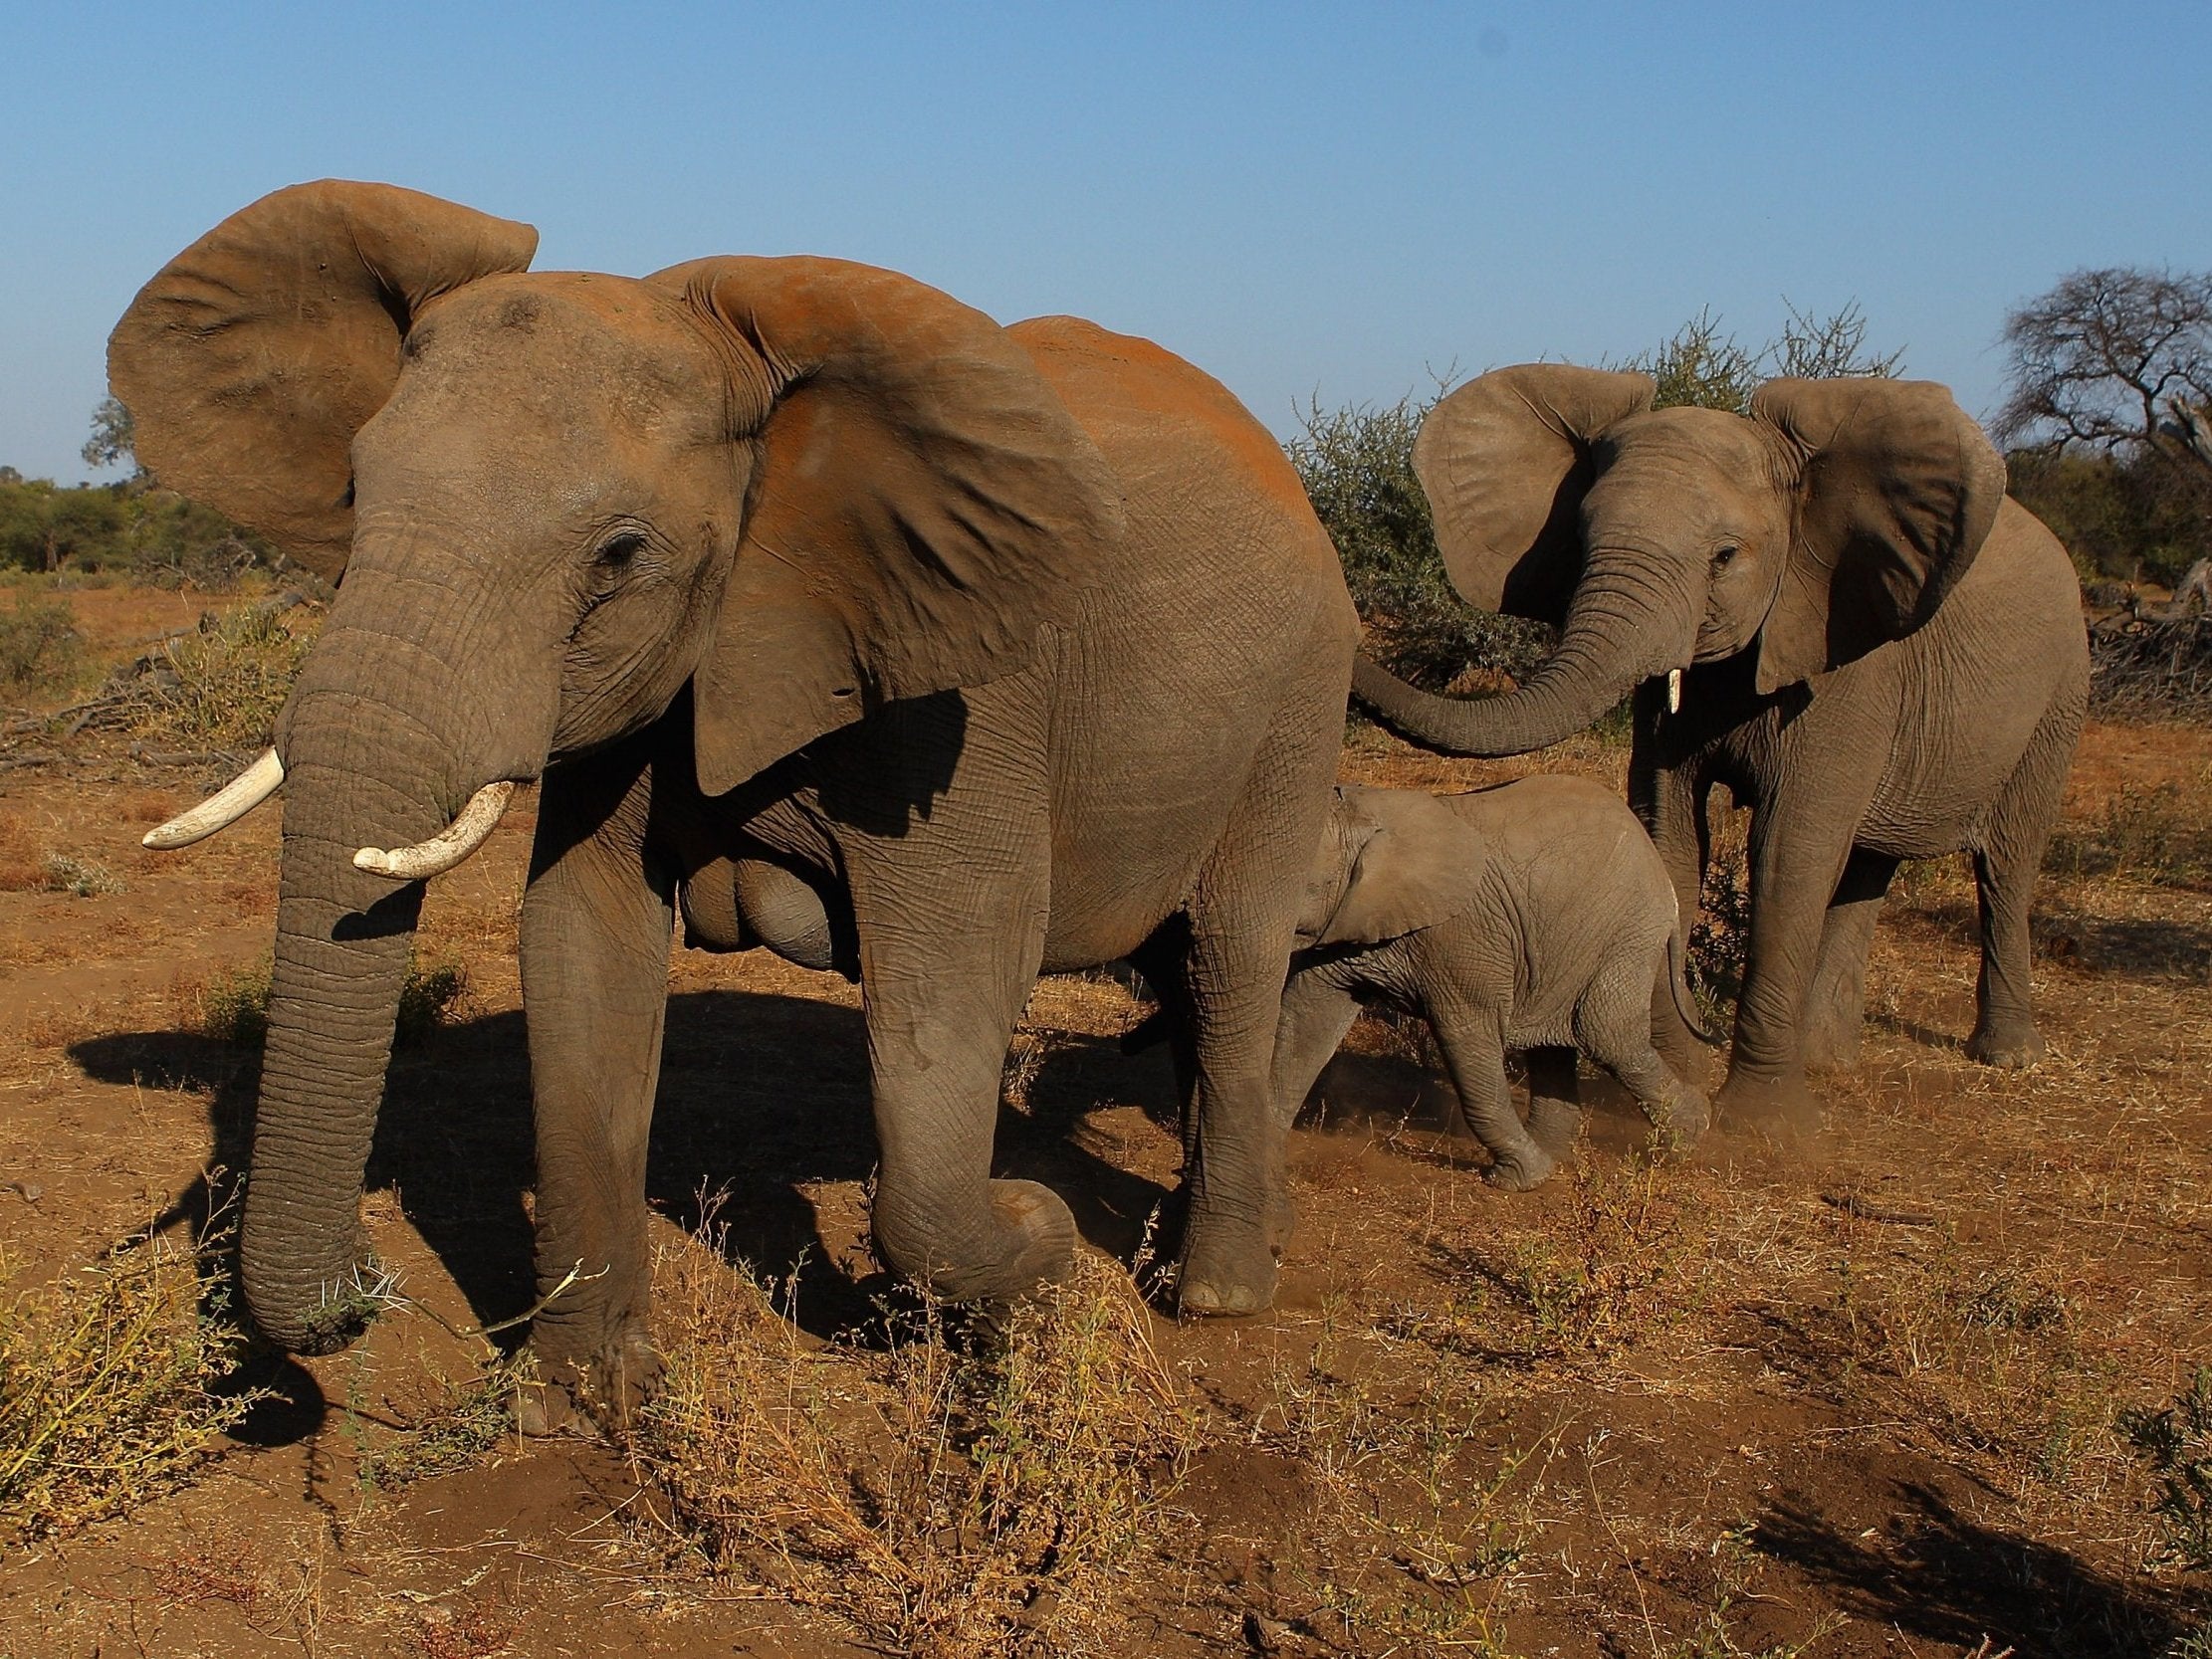 Botswana is home to a third of Africa’s elephants